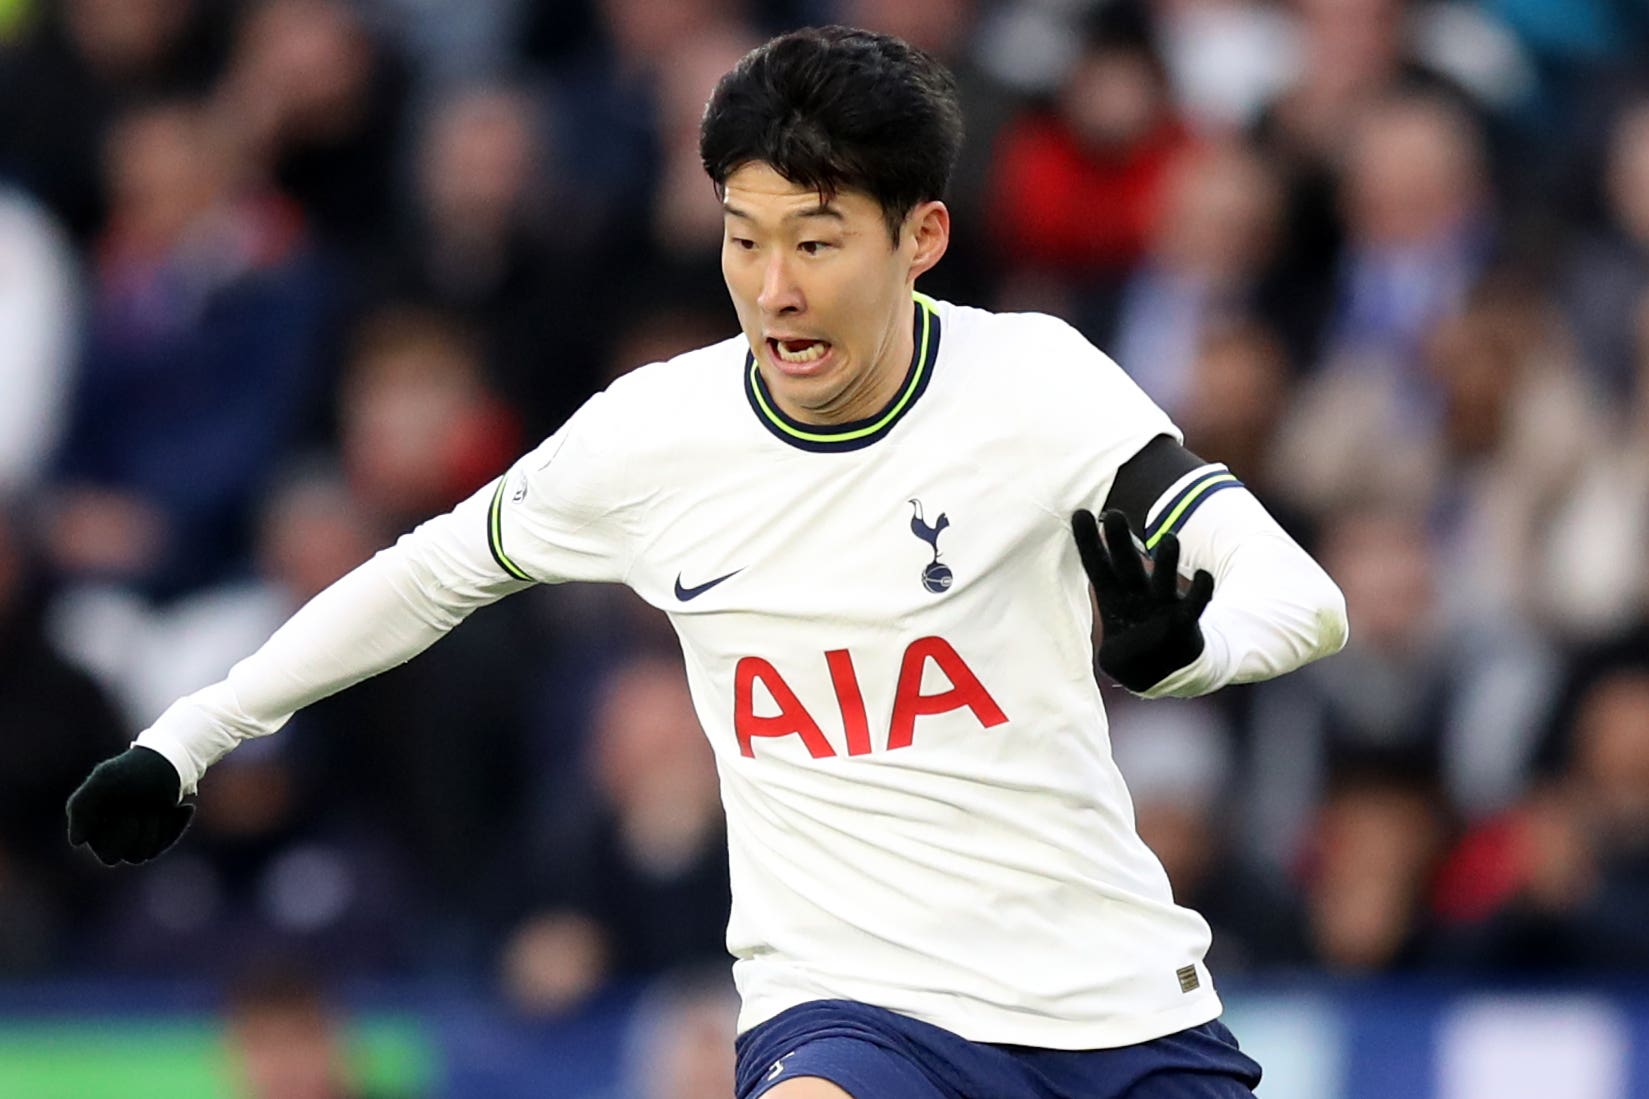 Tottenham eliminated from Champions League: Heung-Min Son's signs